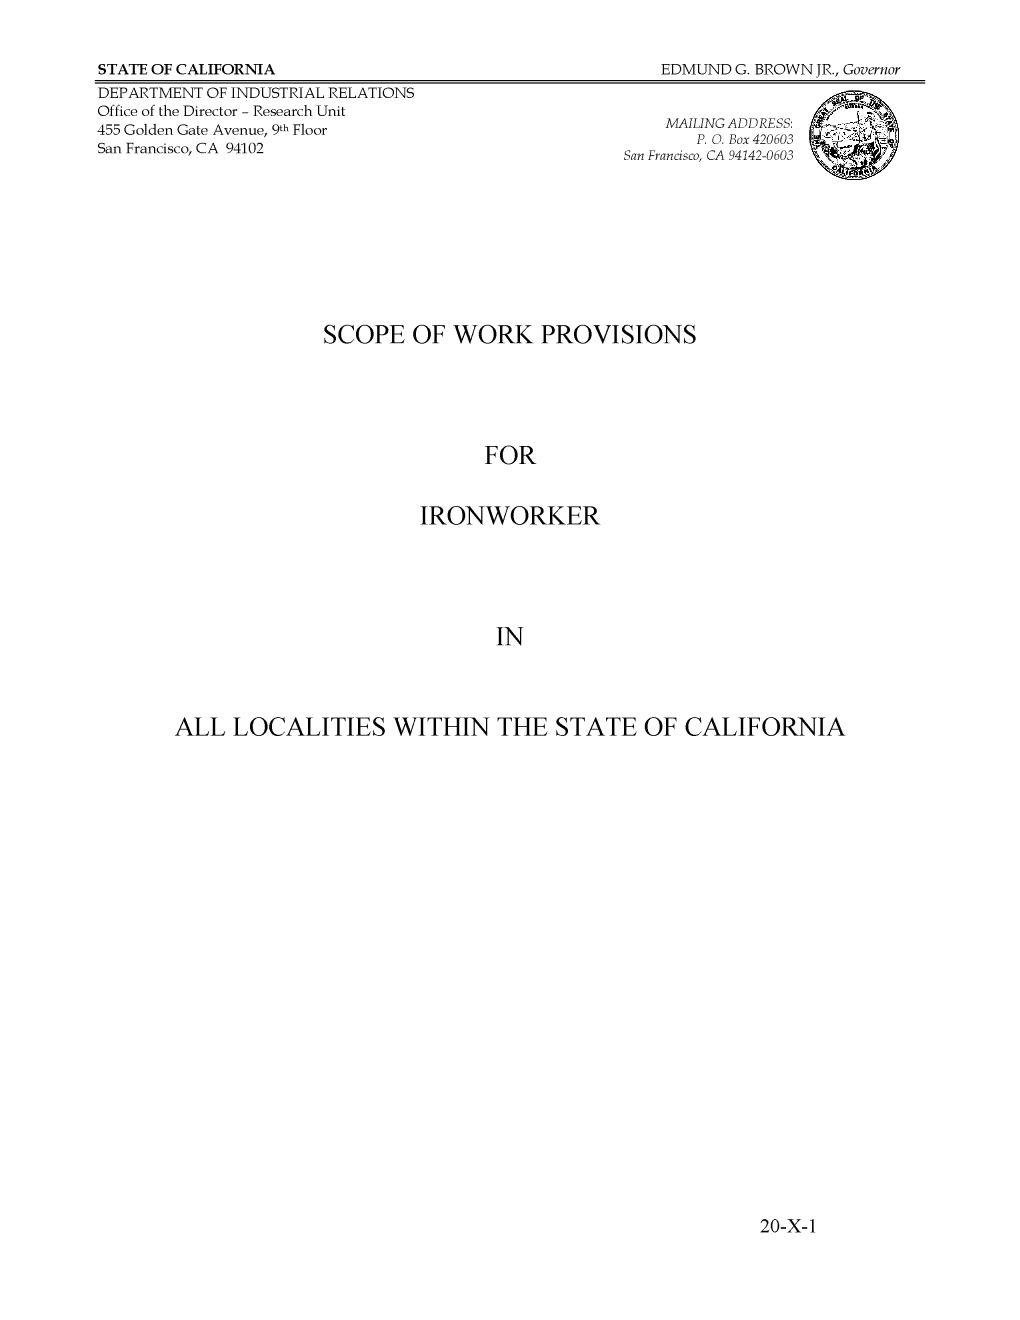 Scope of Work Provisions for Ironworker in All Localities